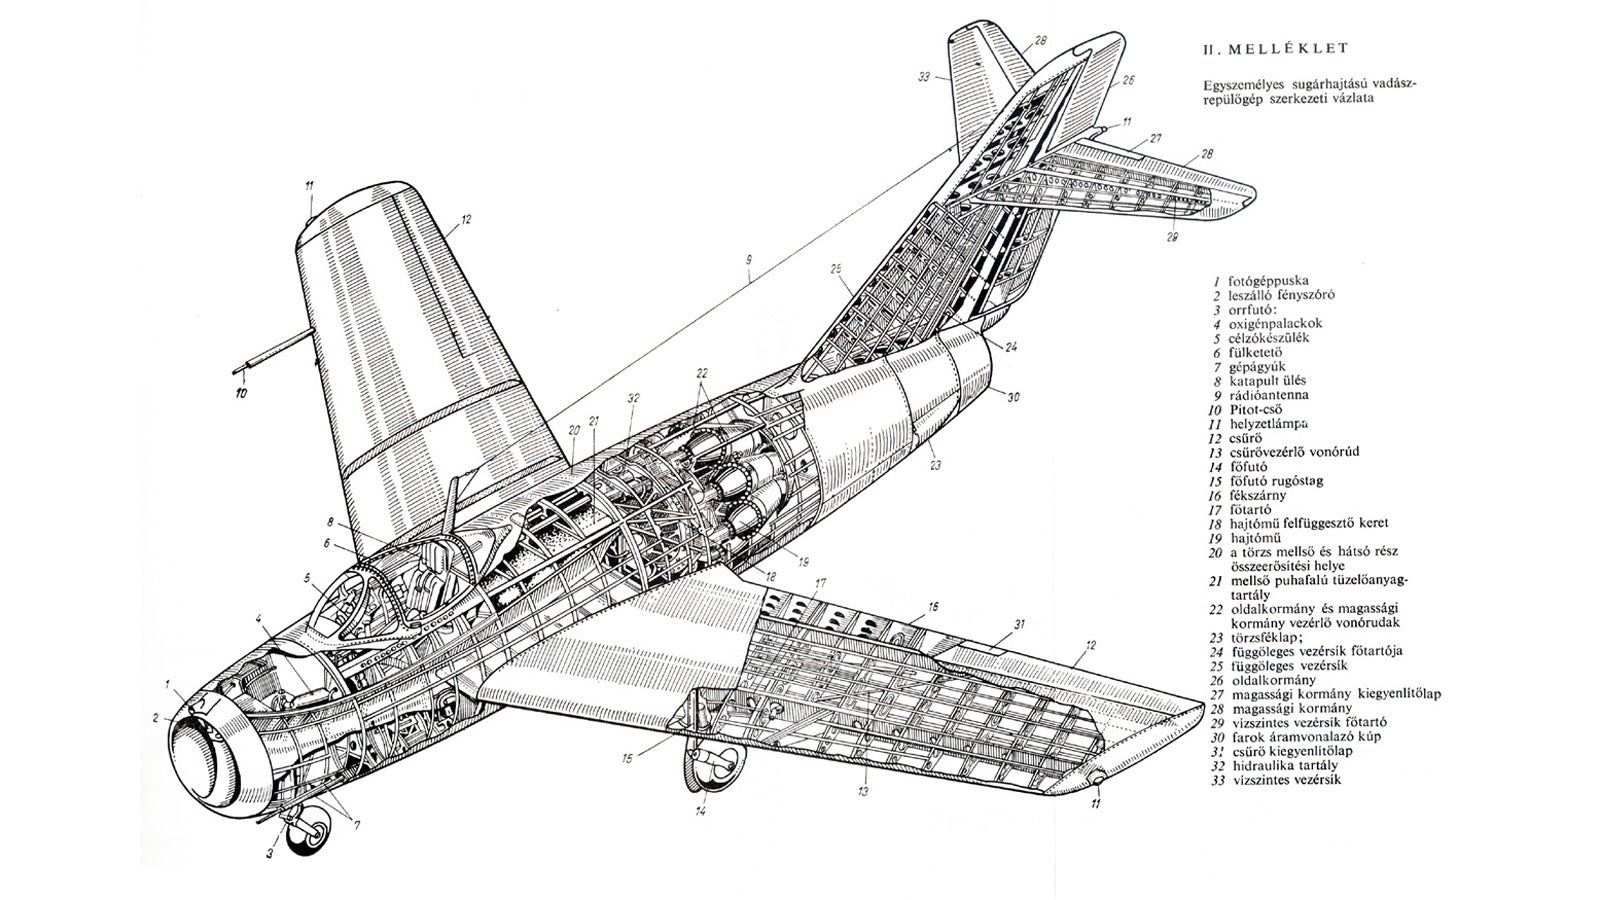 feast your eyes on these rare aircraft cutaway drawings